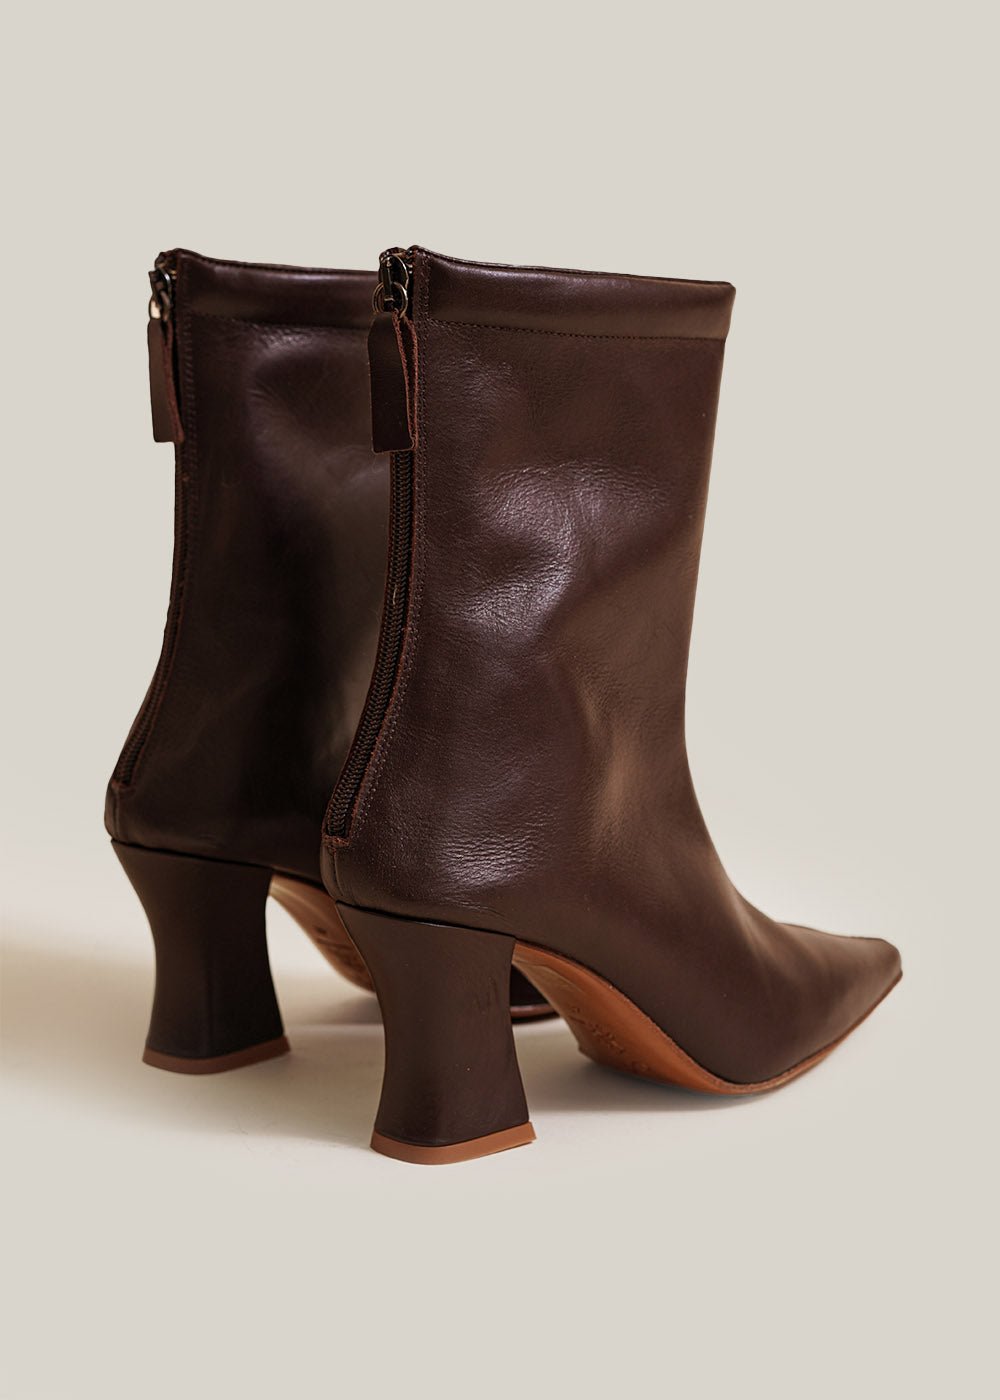 About Arianne Caoba Marcel Boots - New Classics Studios Sustainable Ethical Fashion Canada